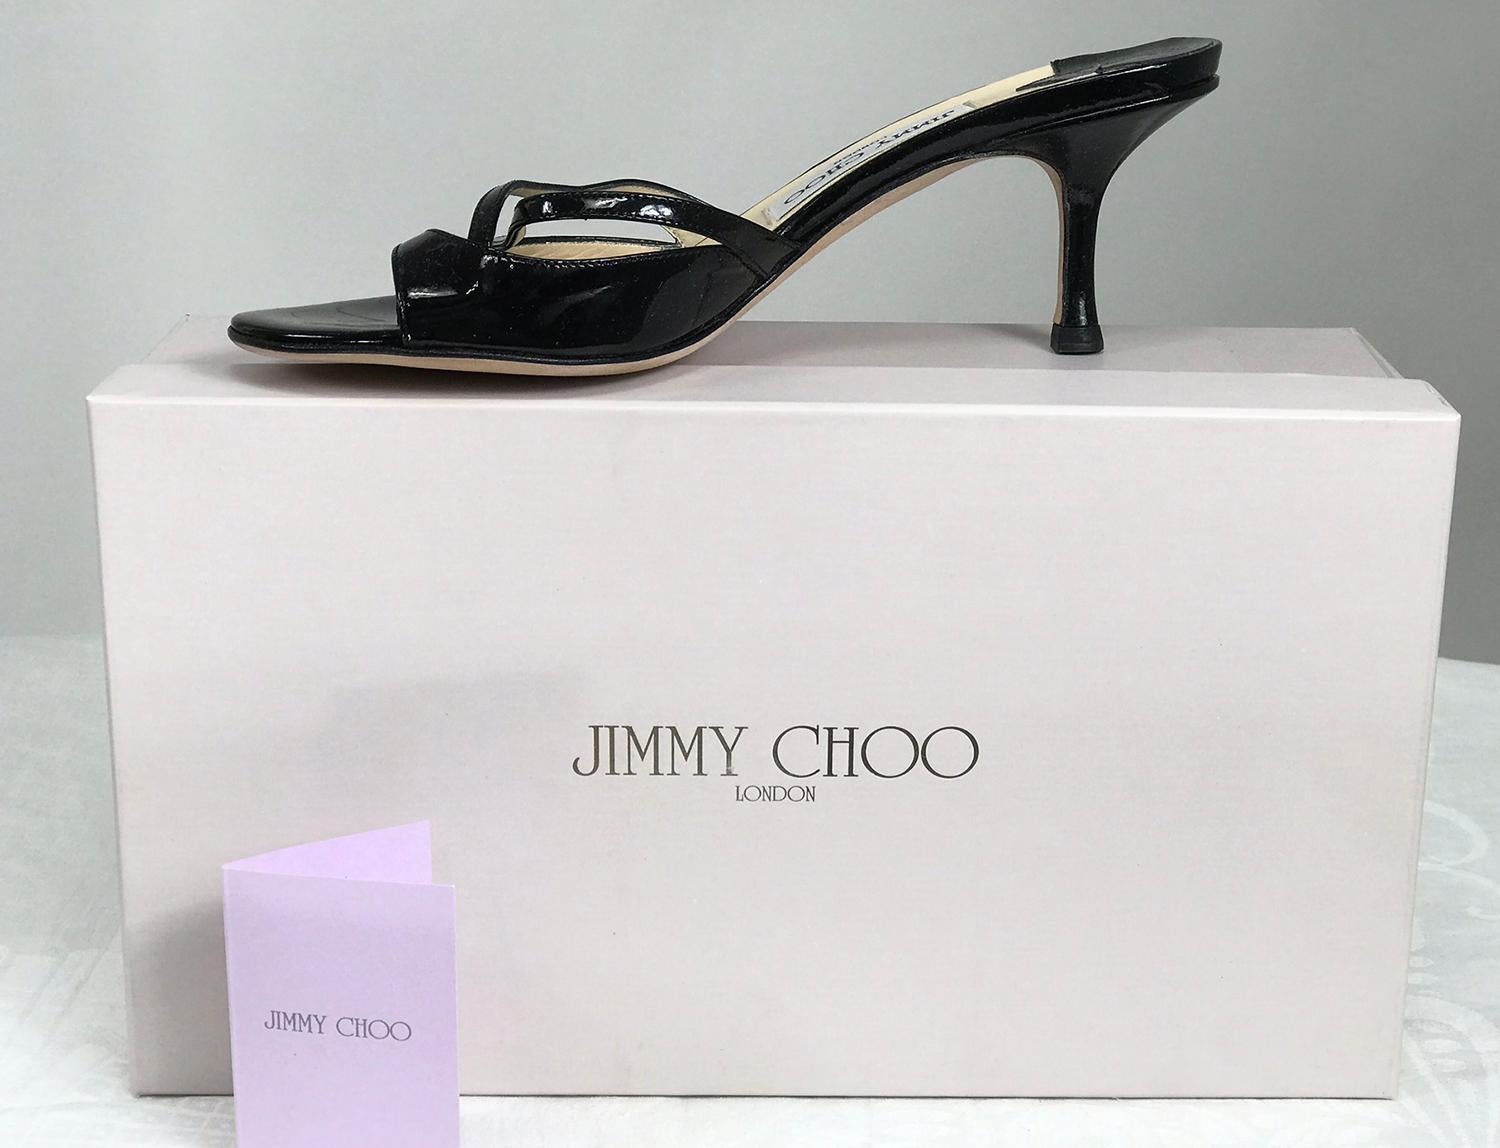 Jimmy Choo Calais.1 black patent leather high heel mules 37.  2 1/2 inch heels. Slip on mules with crisscross straps and band. Unworn, with box.